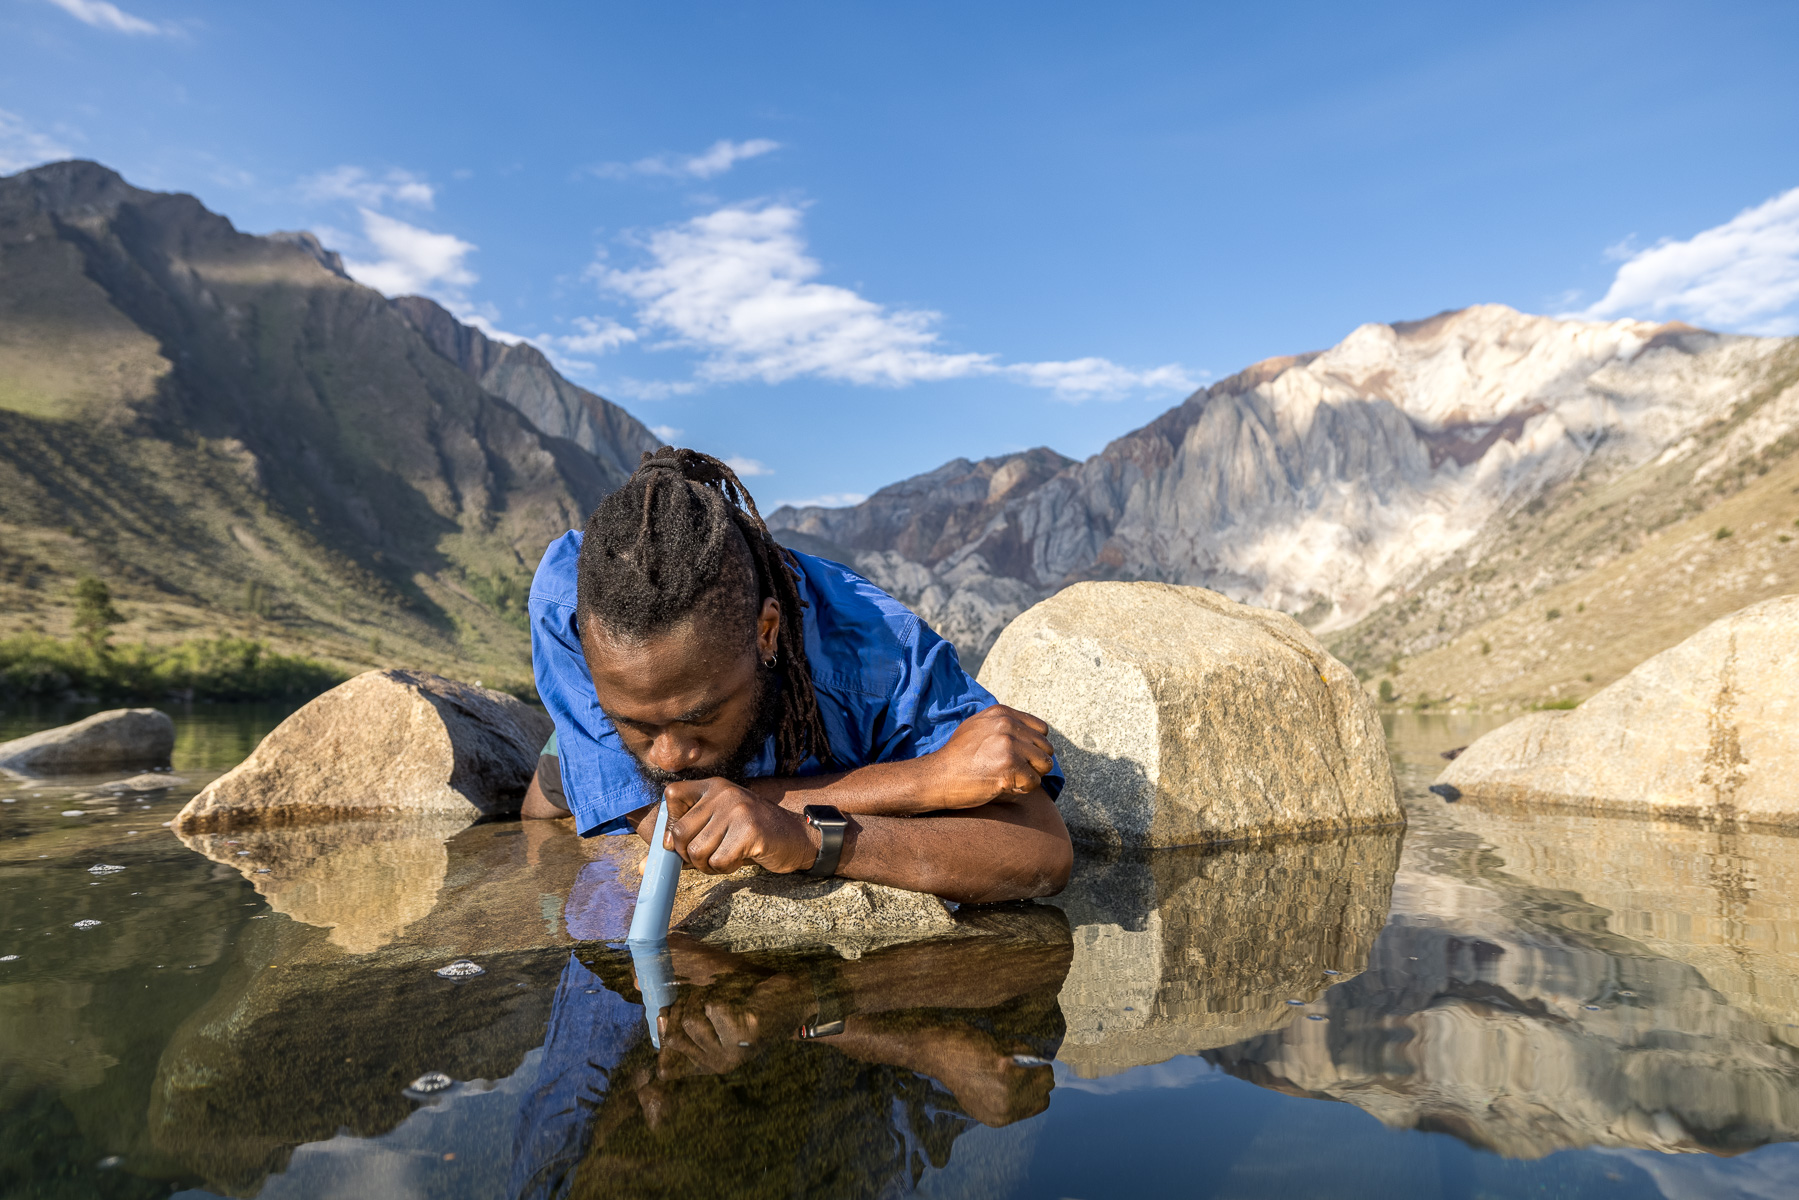 Has anyone used a life straw in India? How well did it work? Did